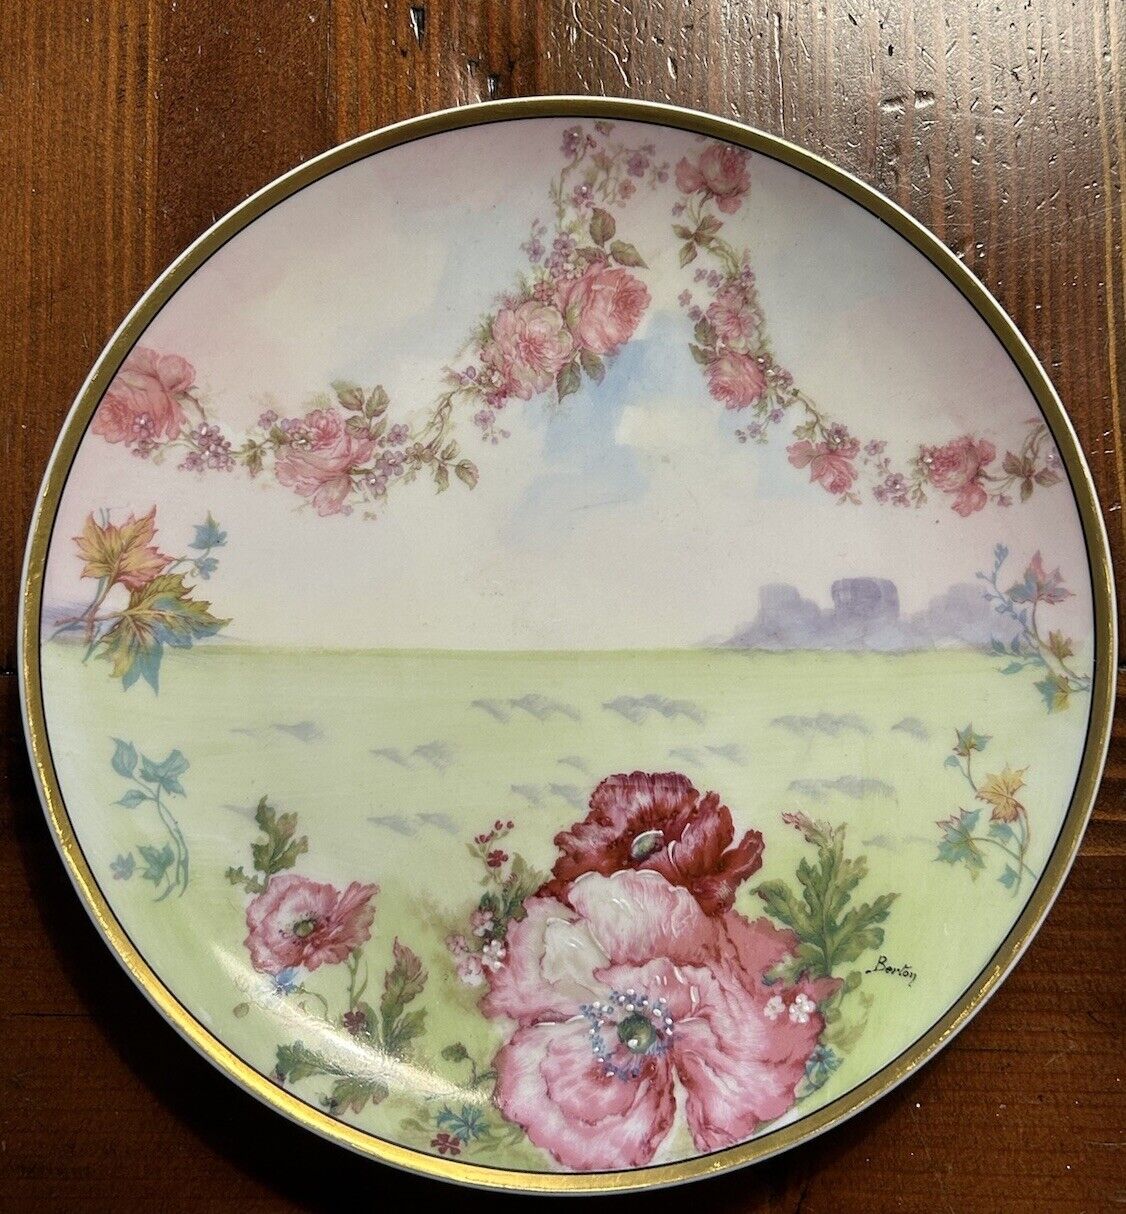 limoges hand painted plate marked Haviland France Rose Garland Poppy Flowers